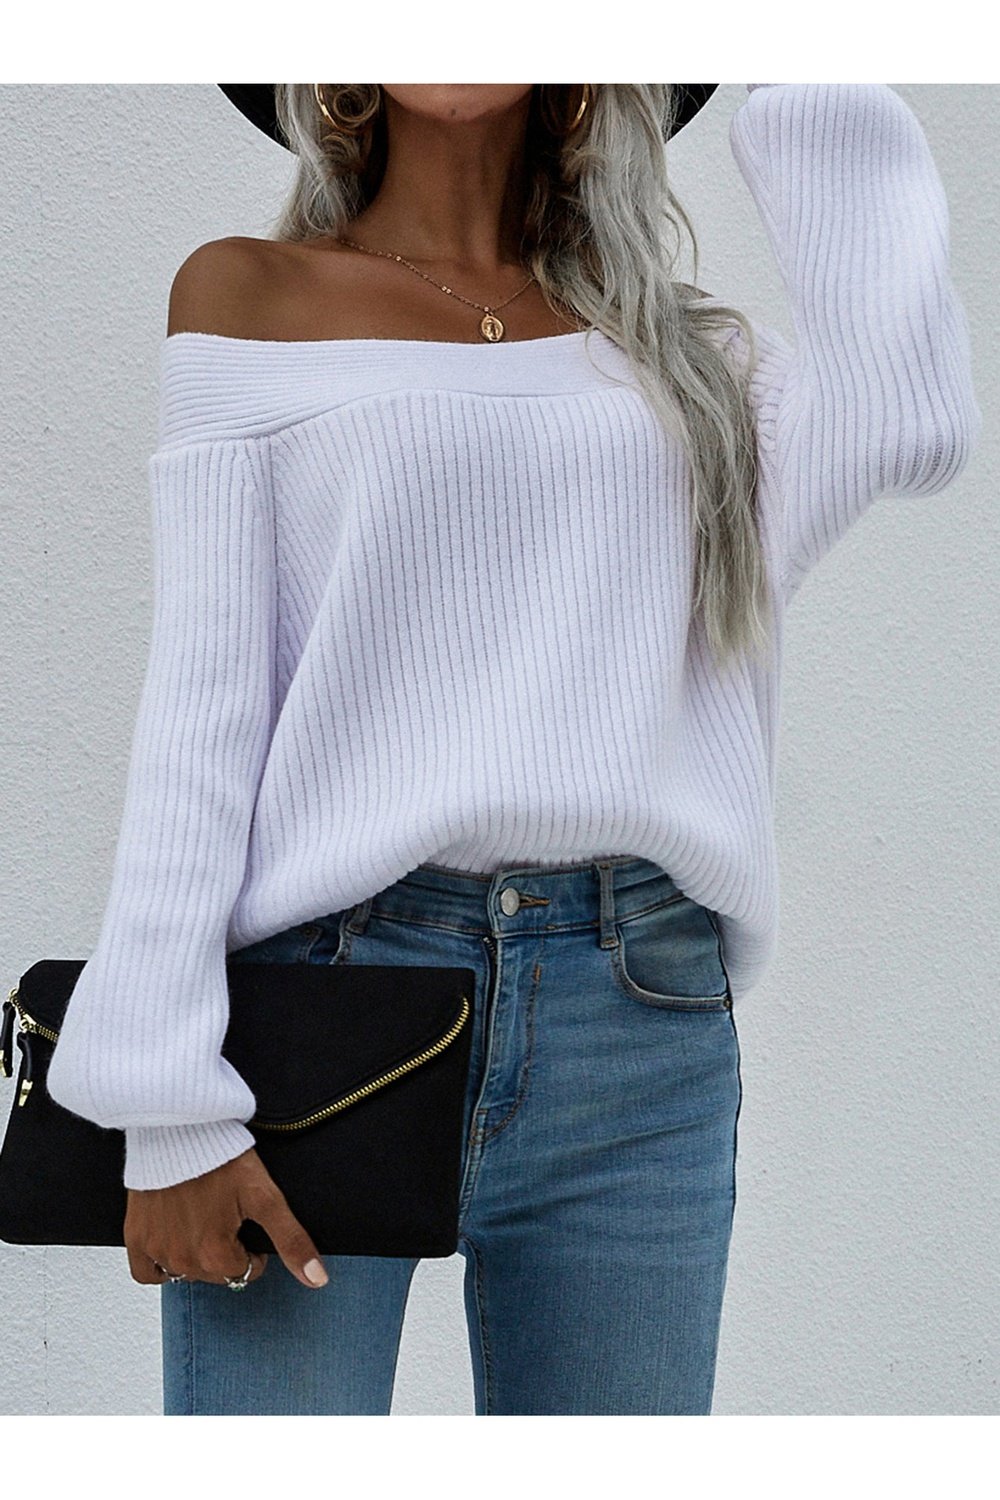 Off-Shoulder Rib-Knit Sweater - Pullover Sweaters - FITGGINS